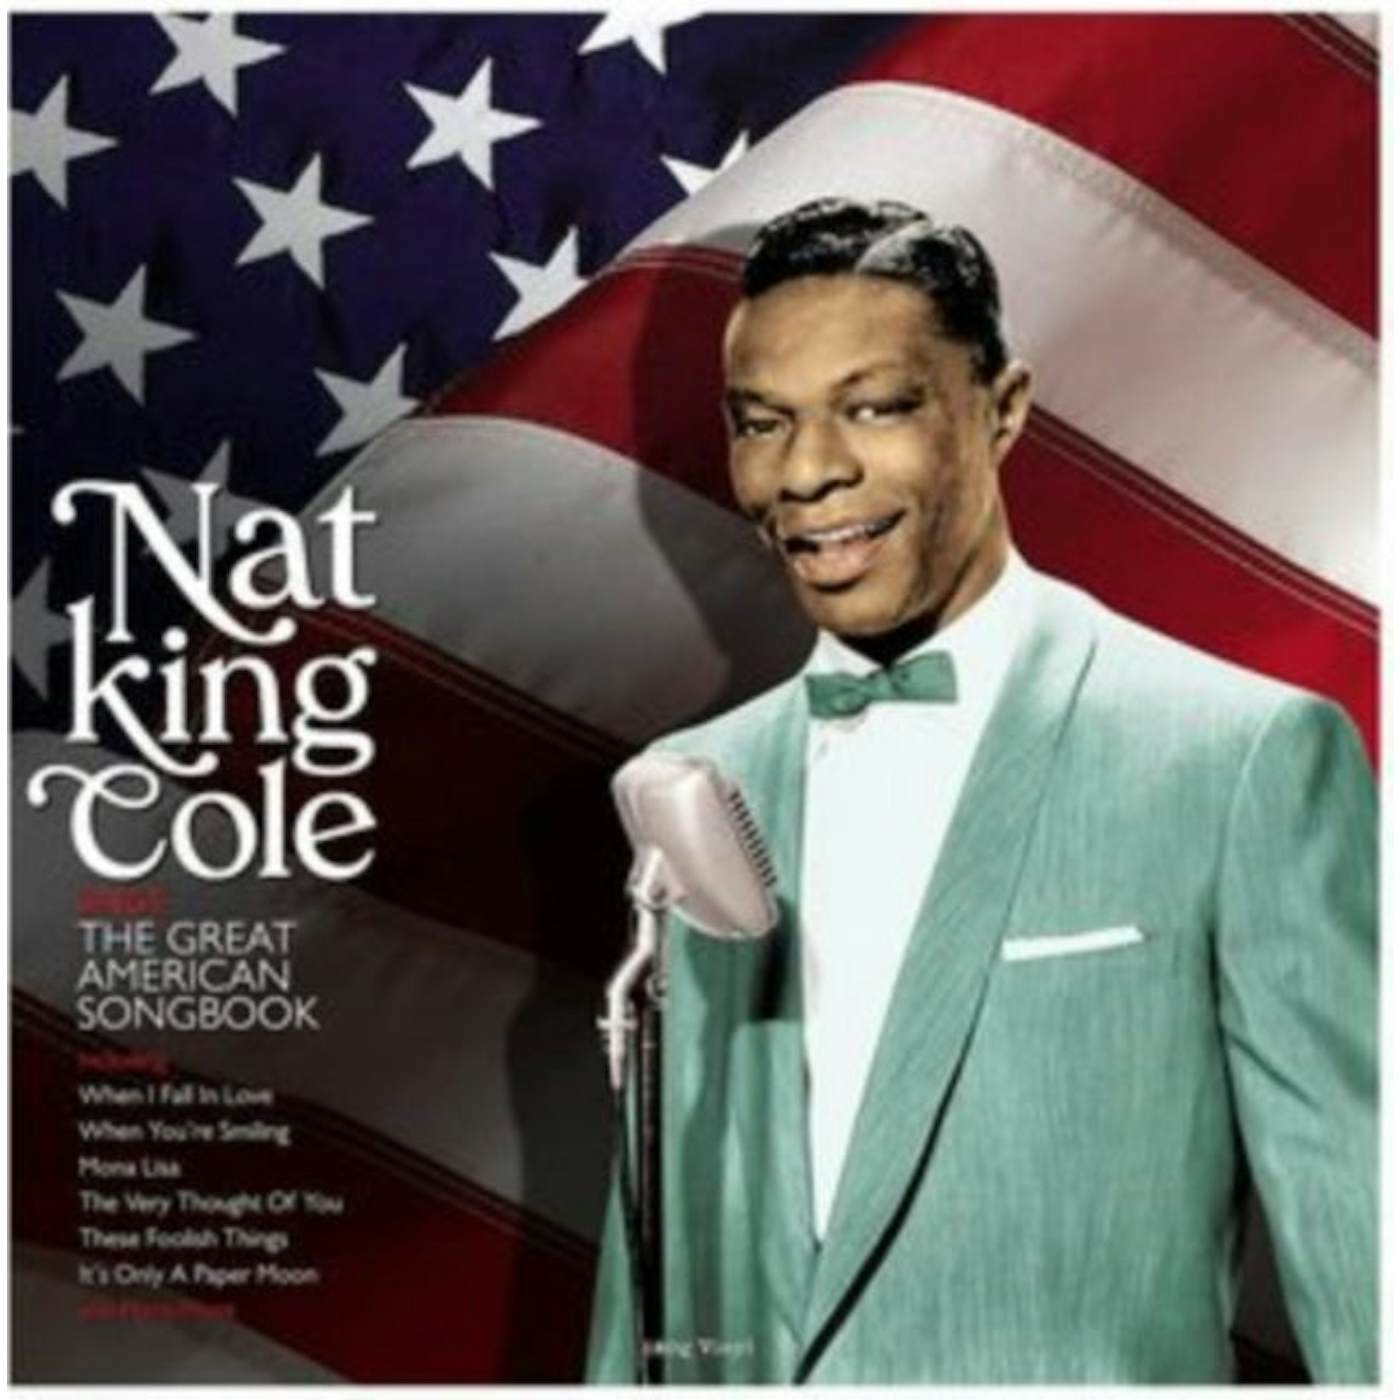 Nat King Cole LP Vinyl Record - Sings The American Songbook